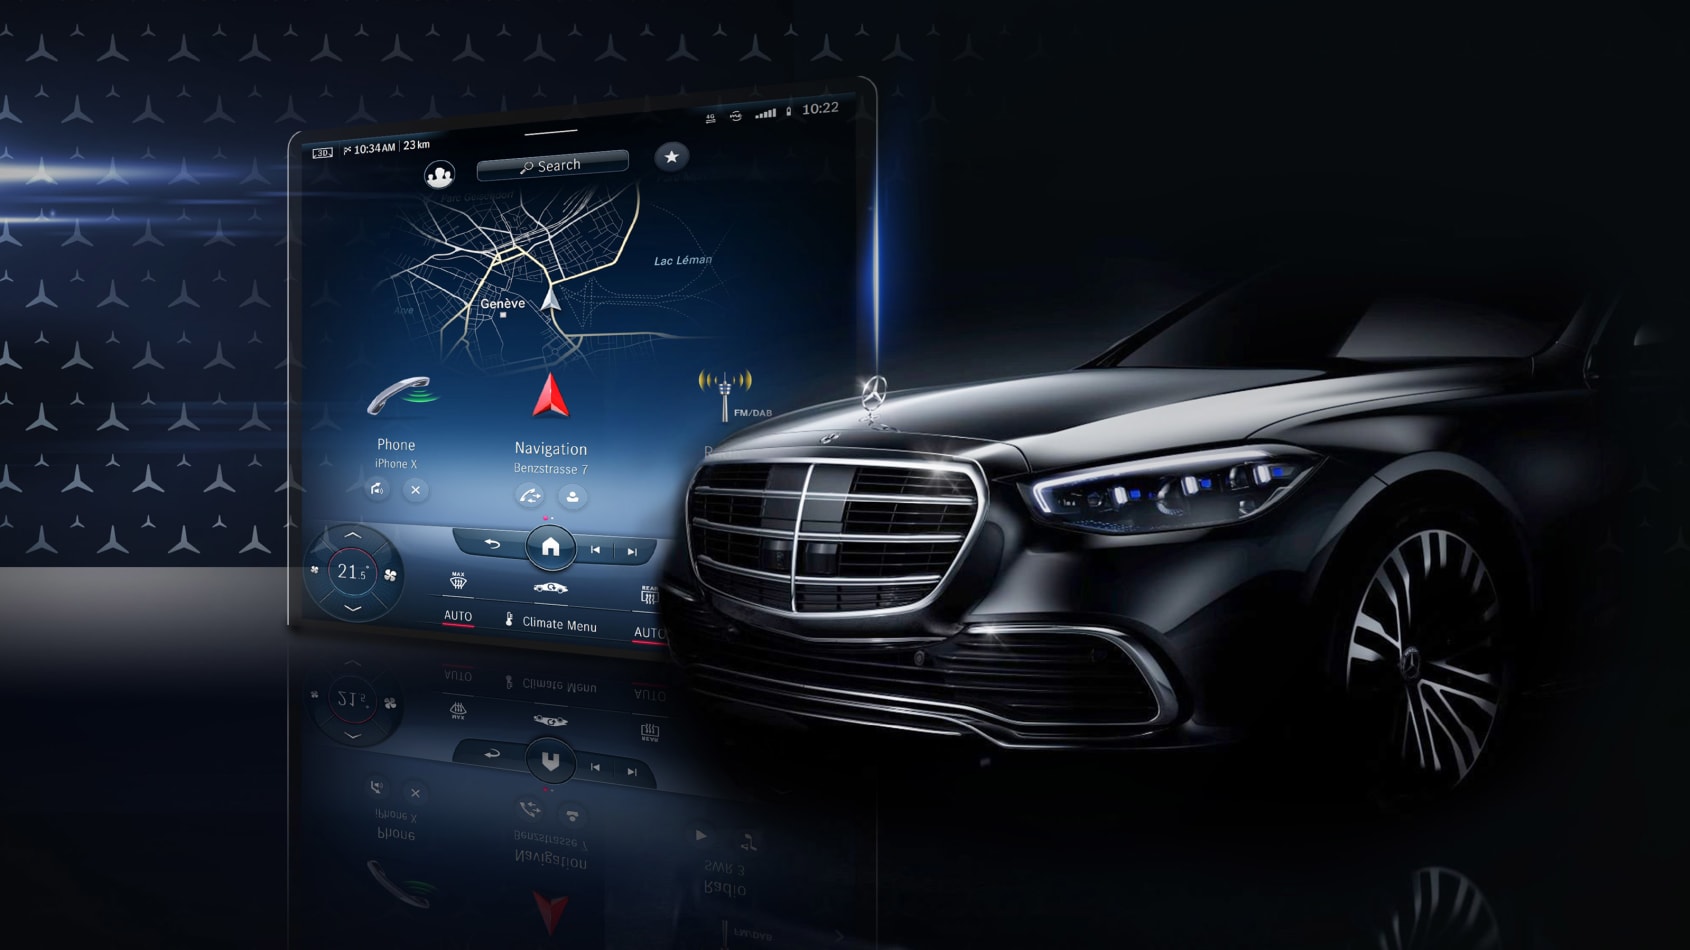 aria-label="New 2020 Mercedes S class teased"